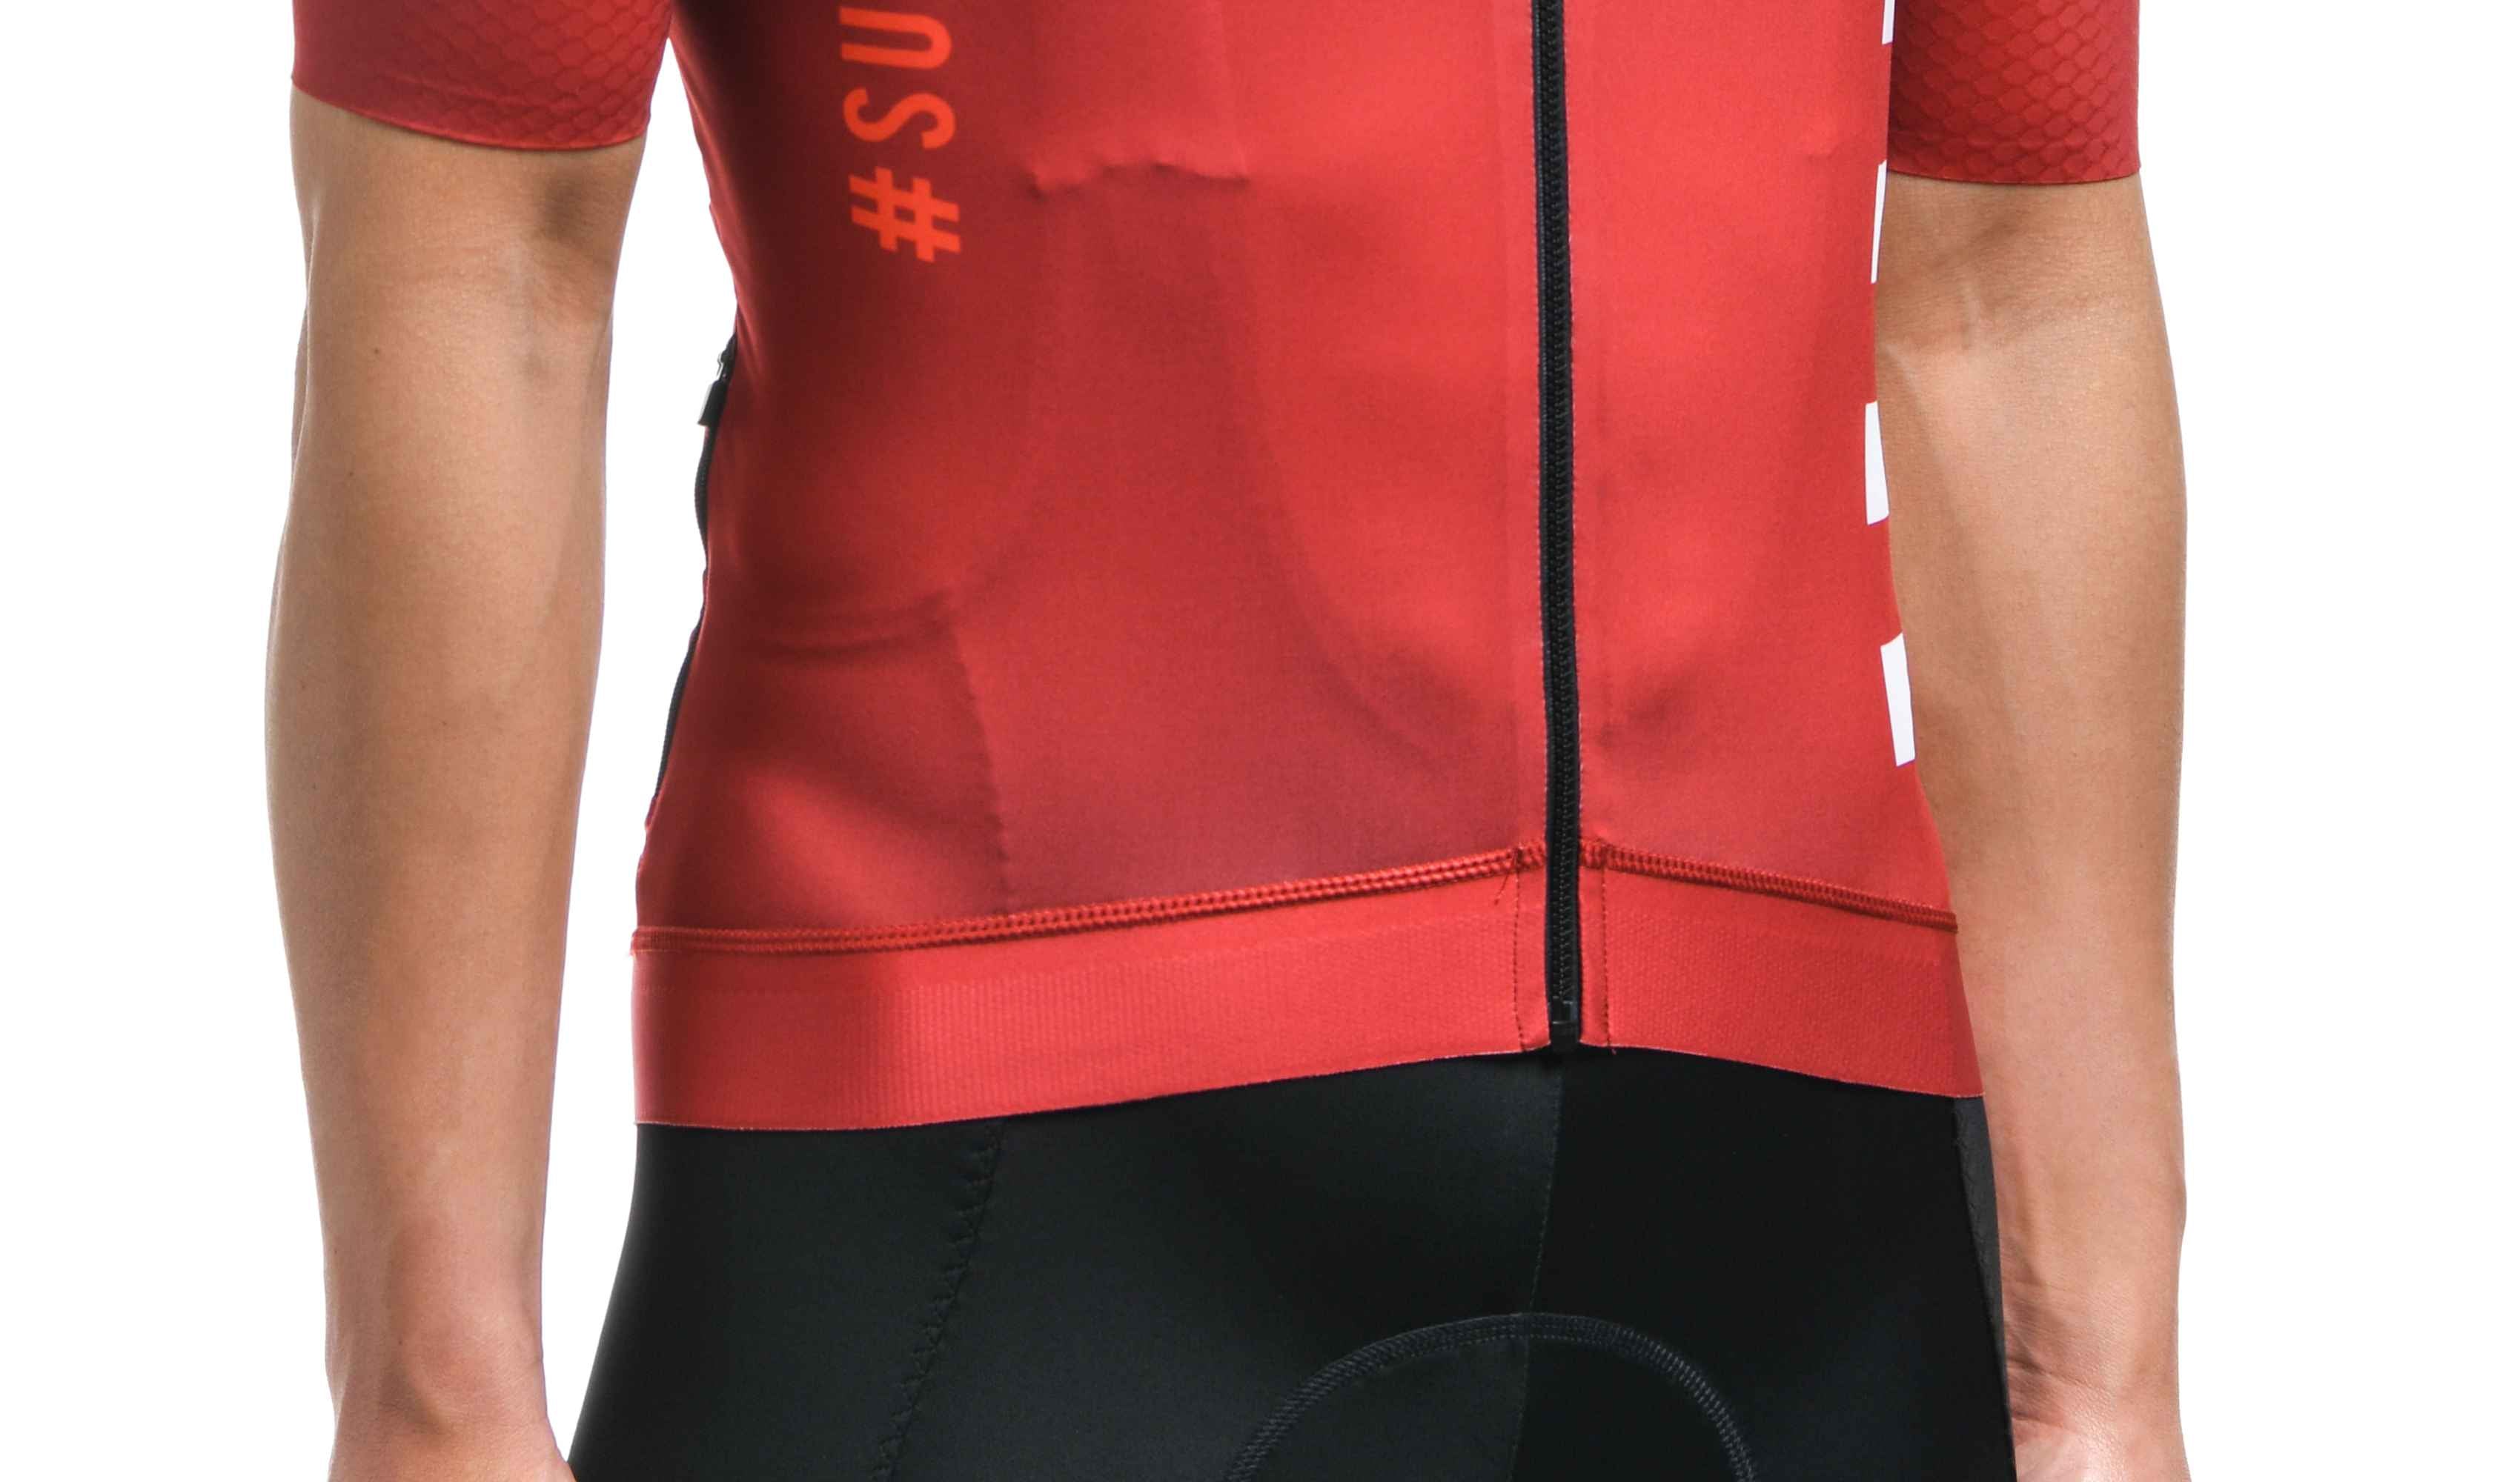 cycling jersey mens